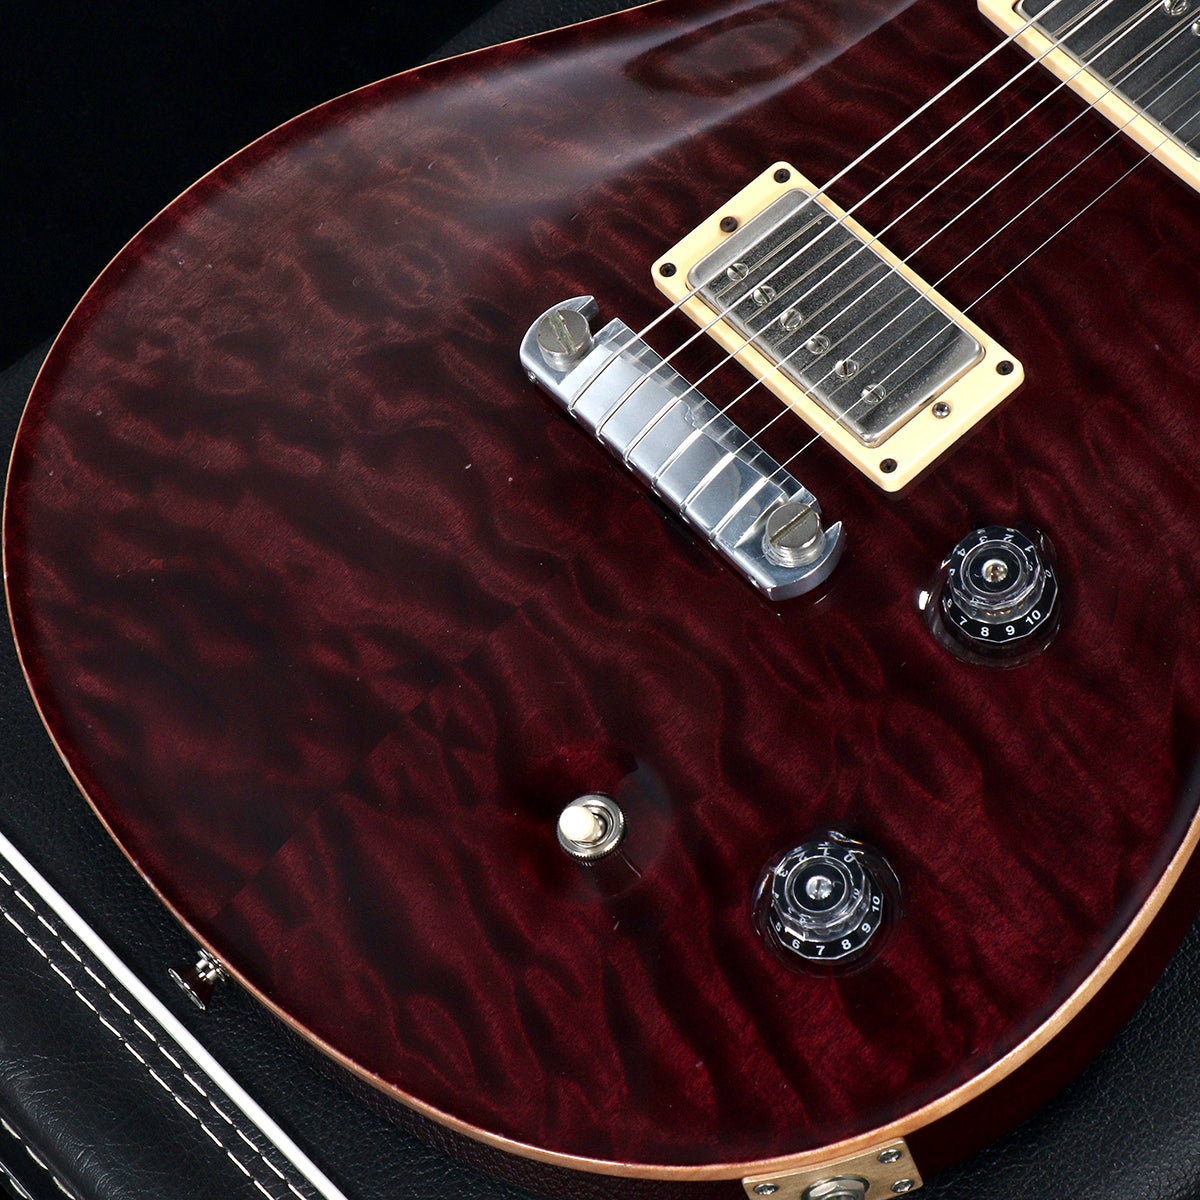 [SN 08 142983] USED PAUL REED SMITH / 2008 Limited Run 57/08 McCarty Cranberry [05]